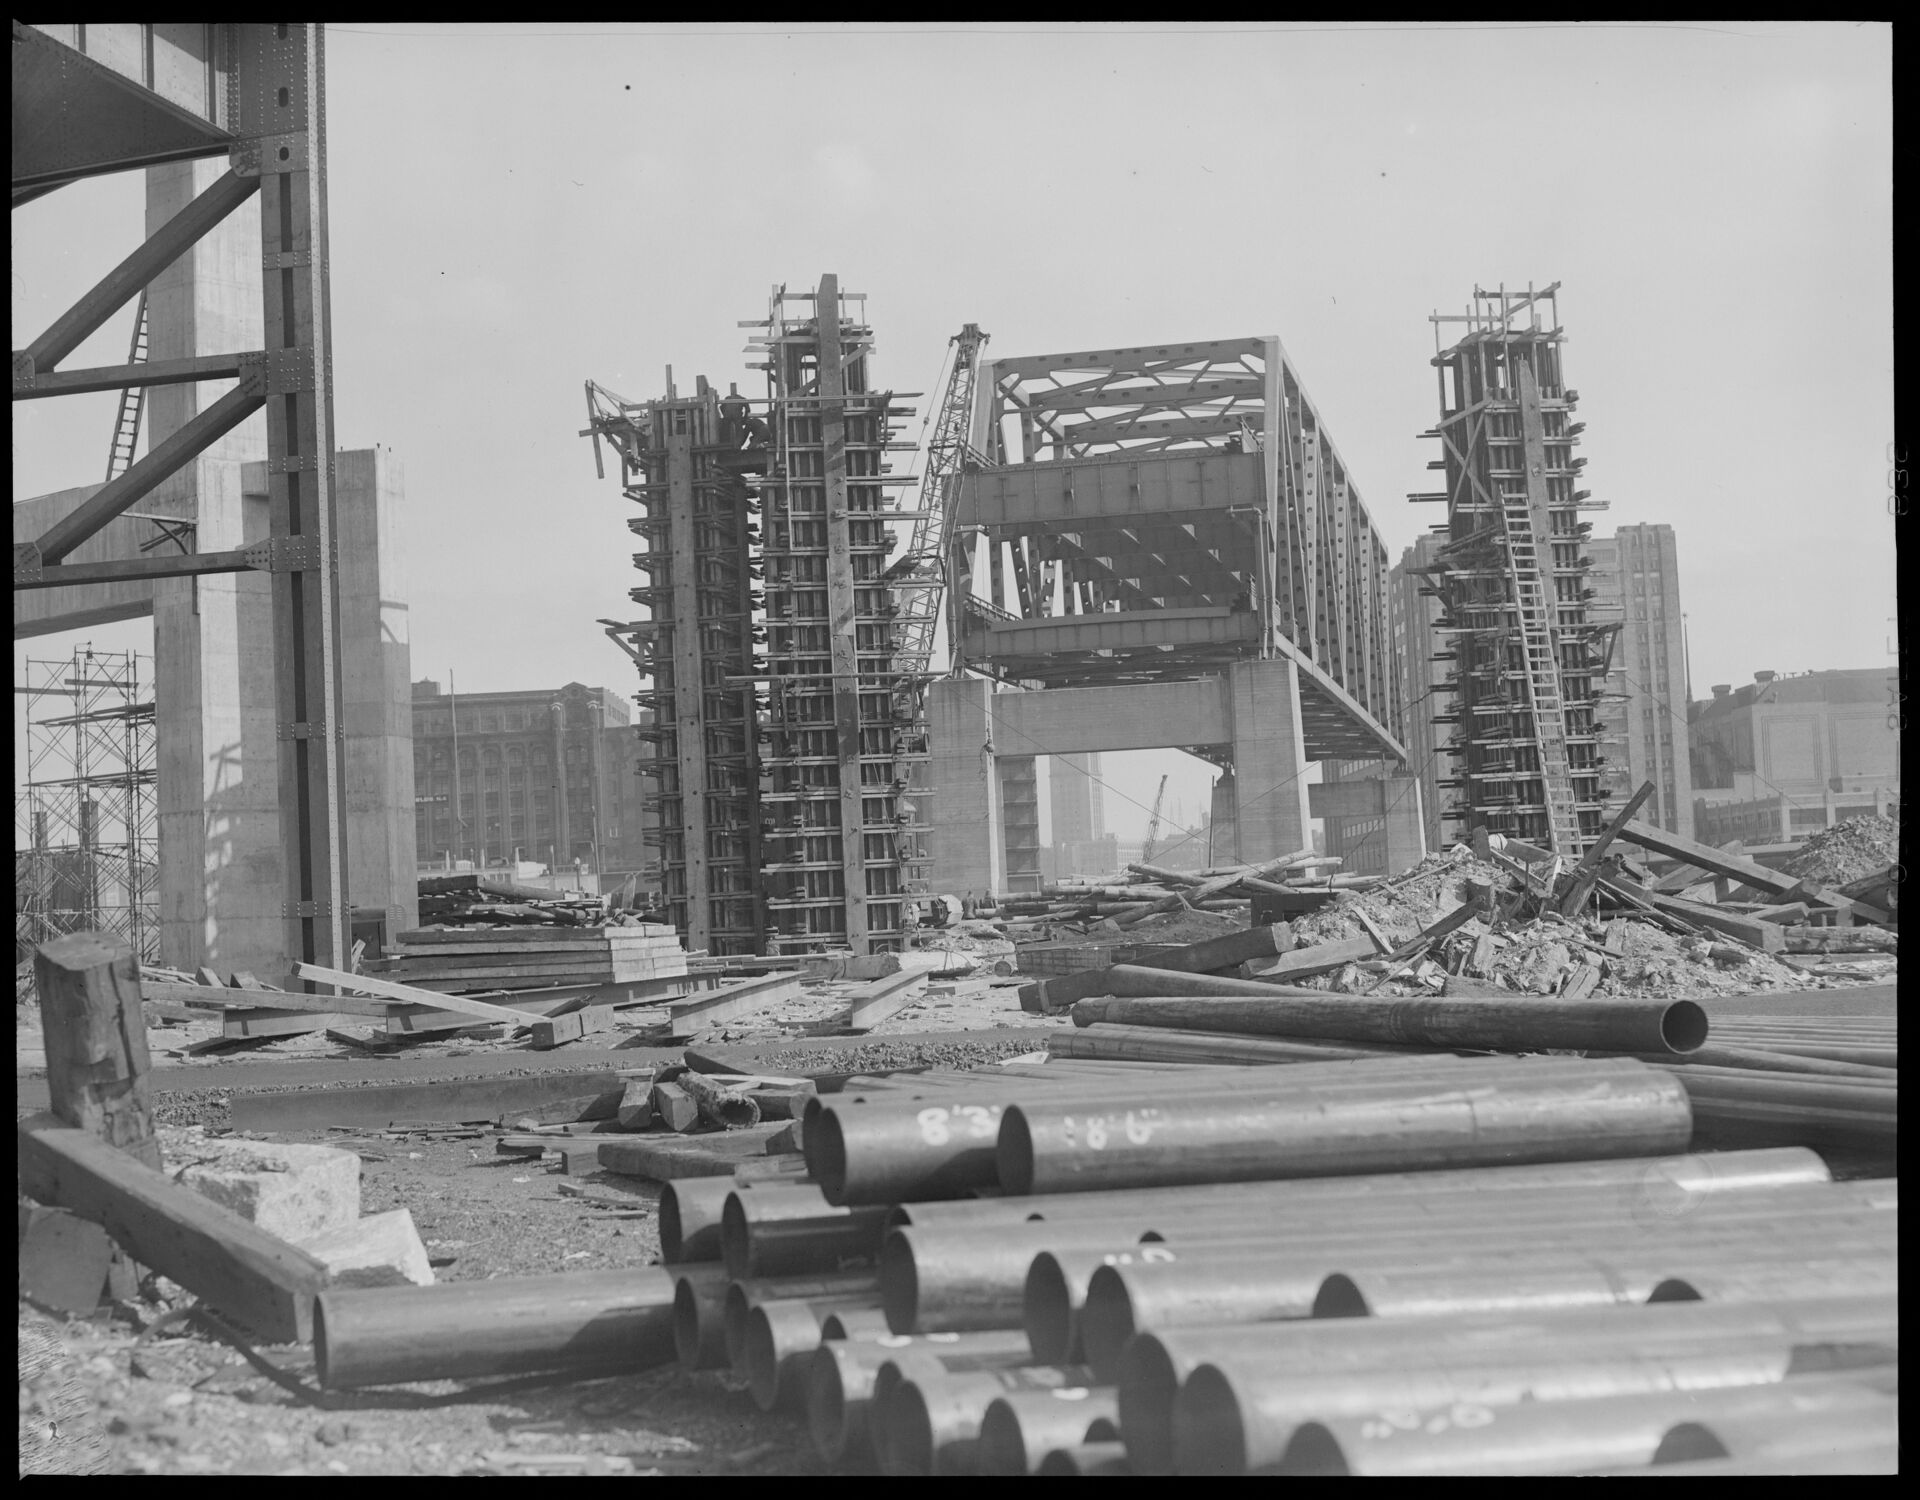 Photograph from around 1947 depicting the construction of the central artery